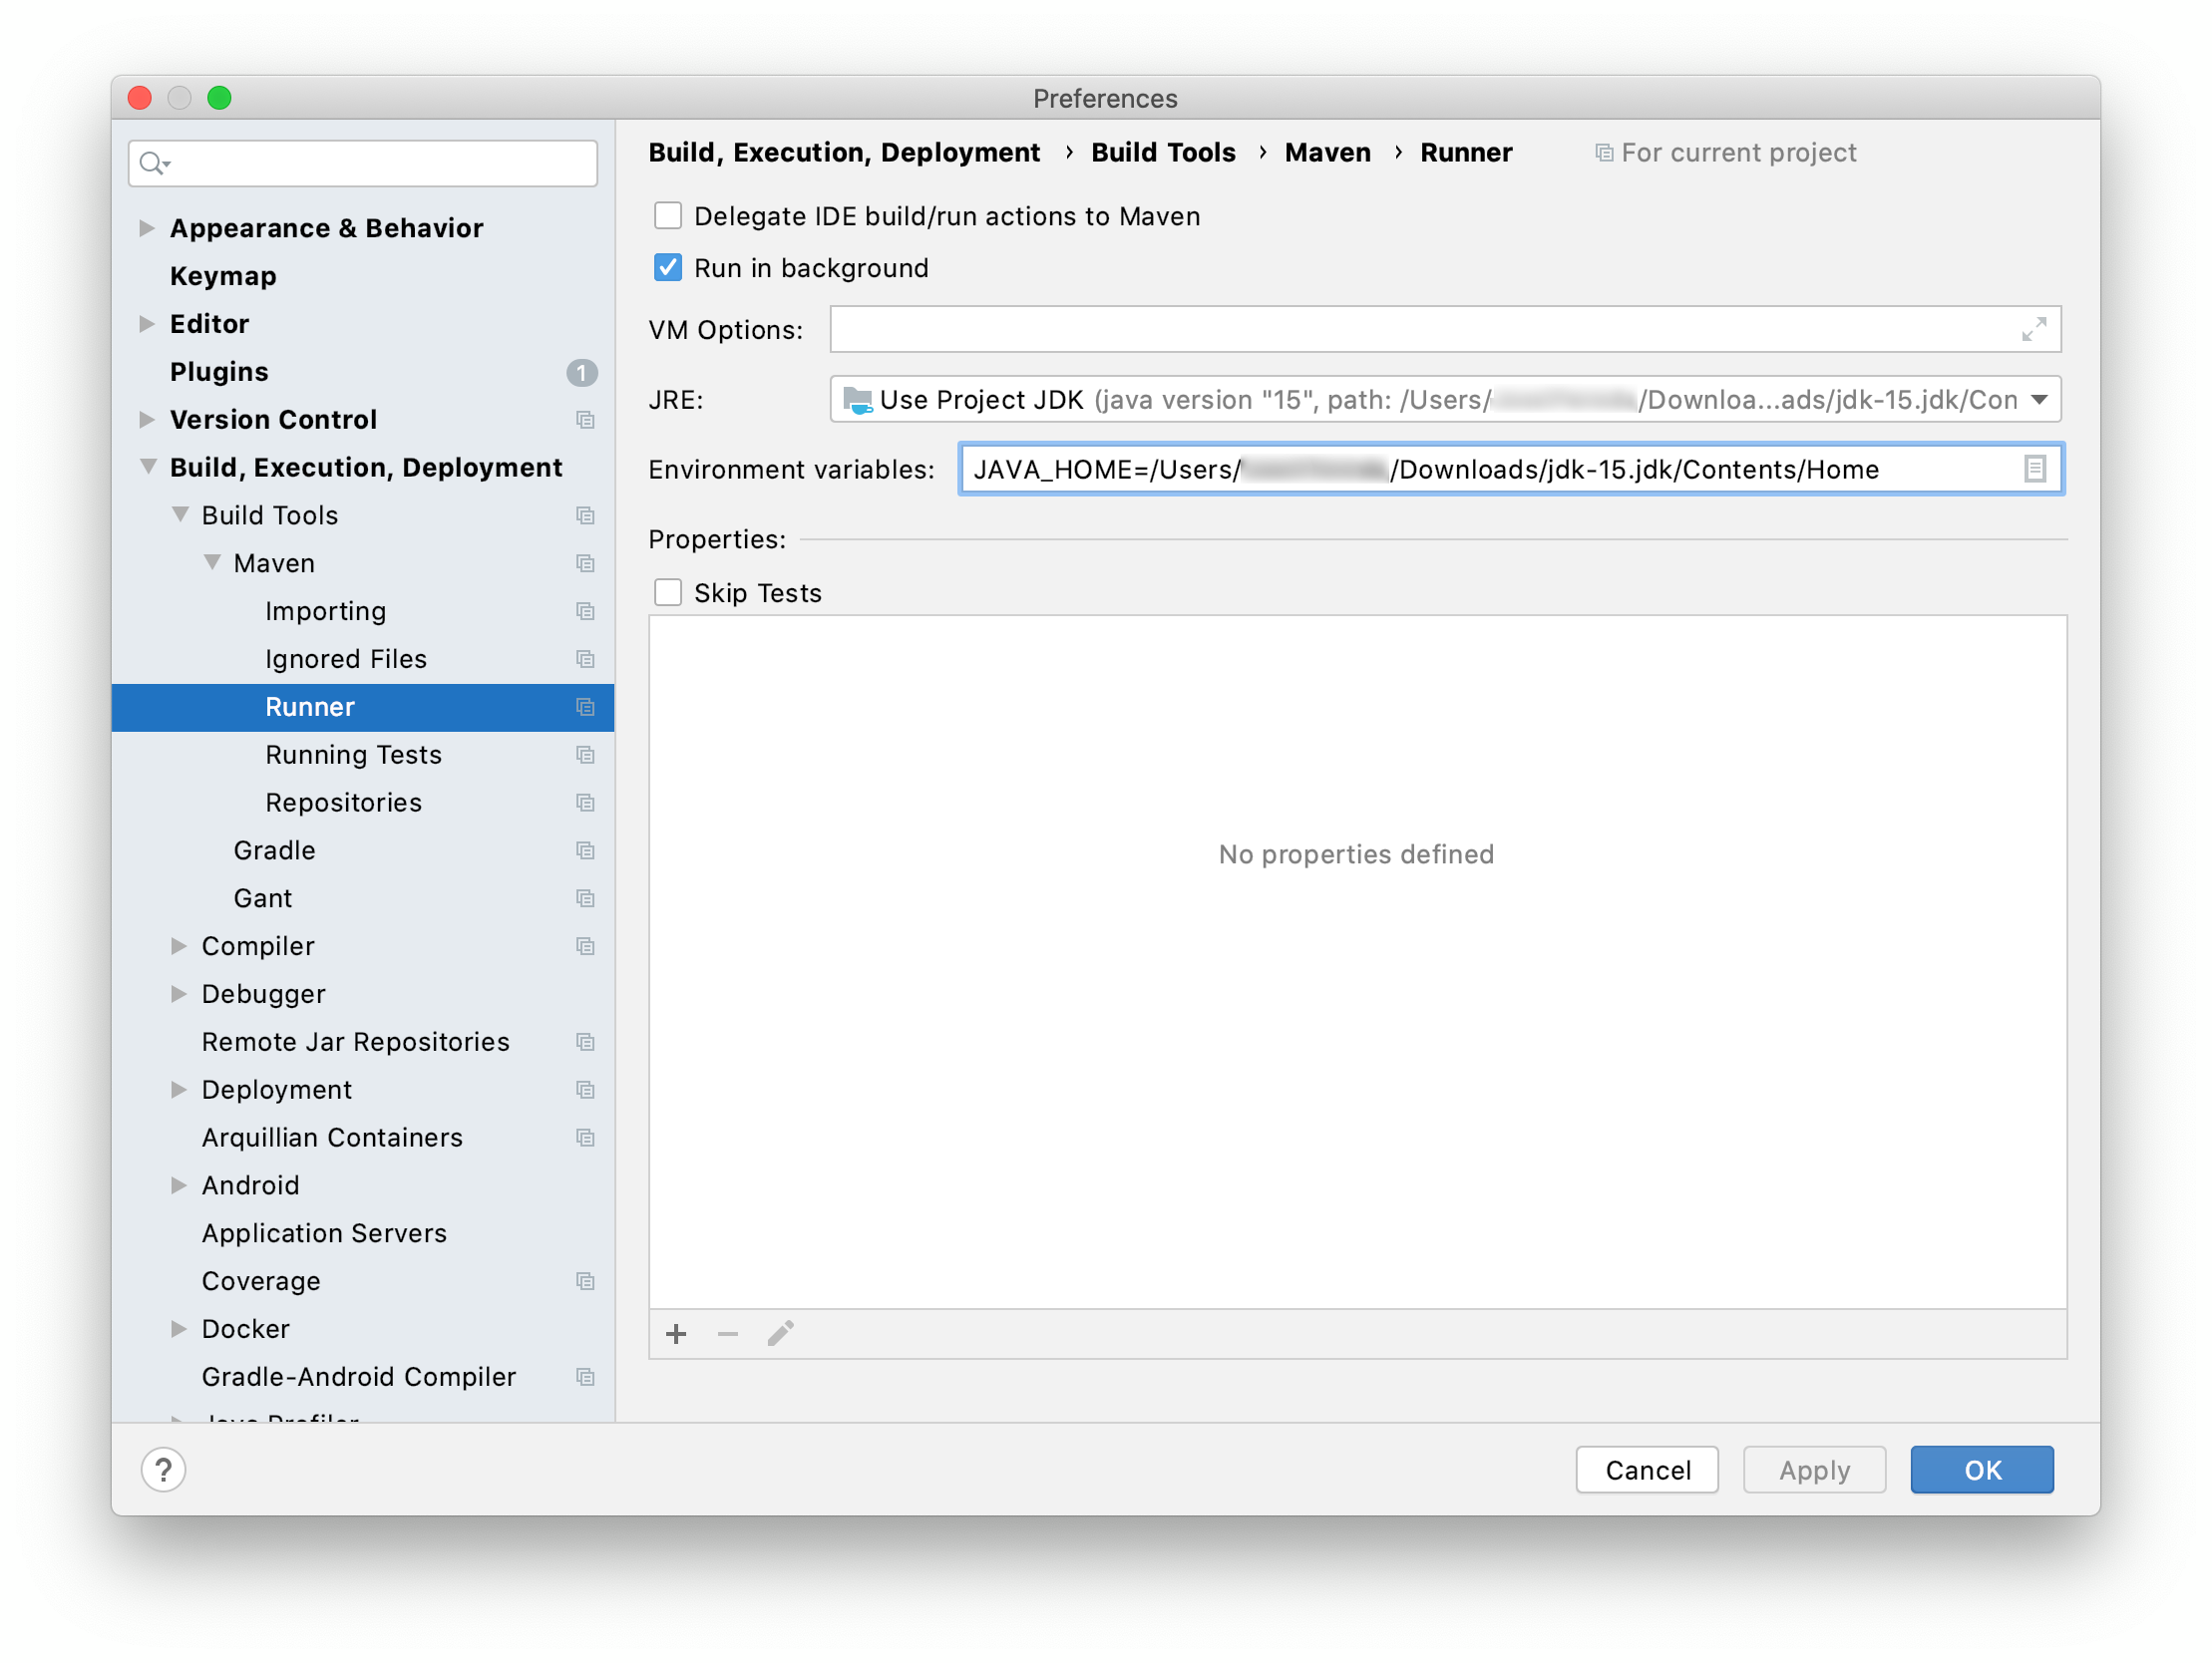 java_home for mac on 1.8